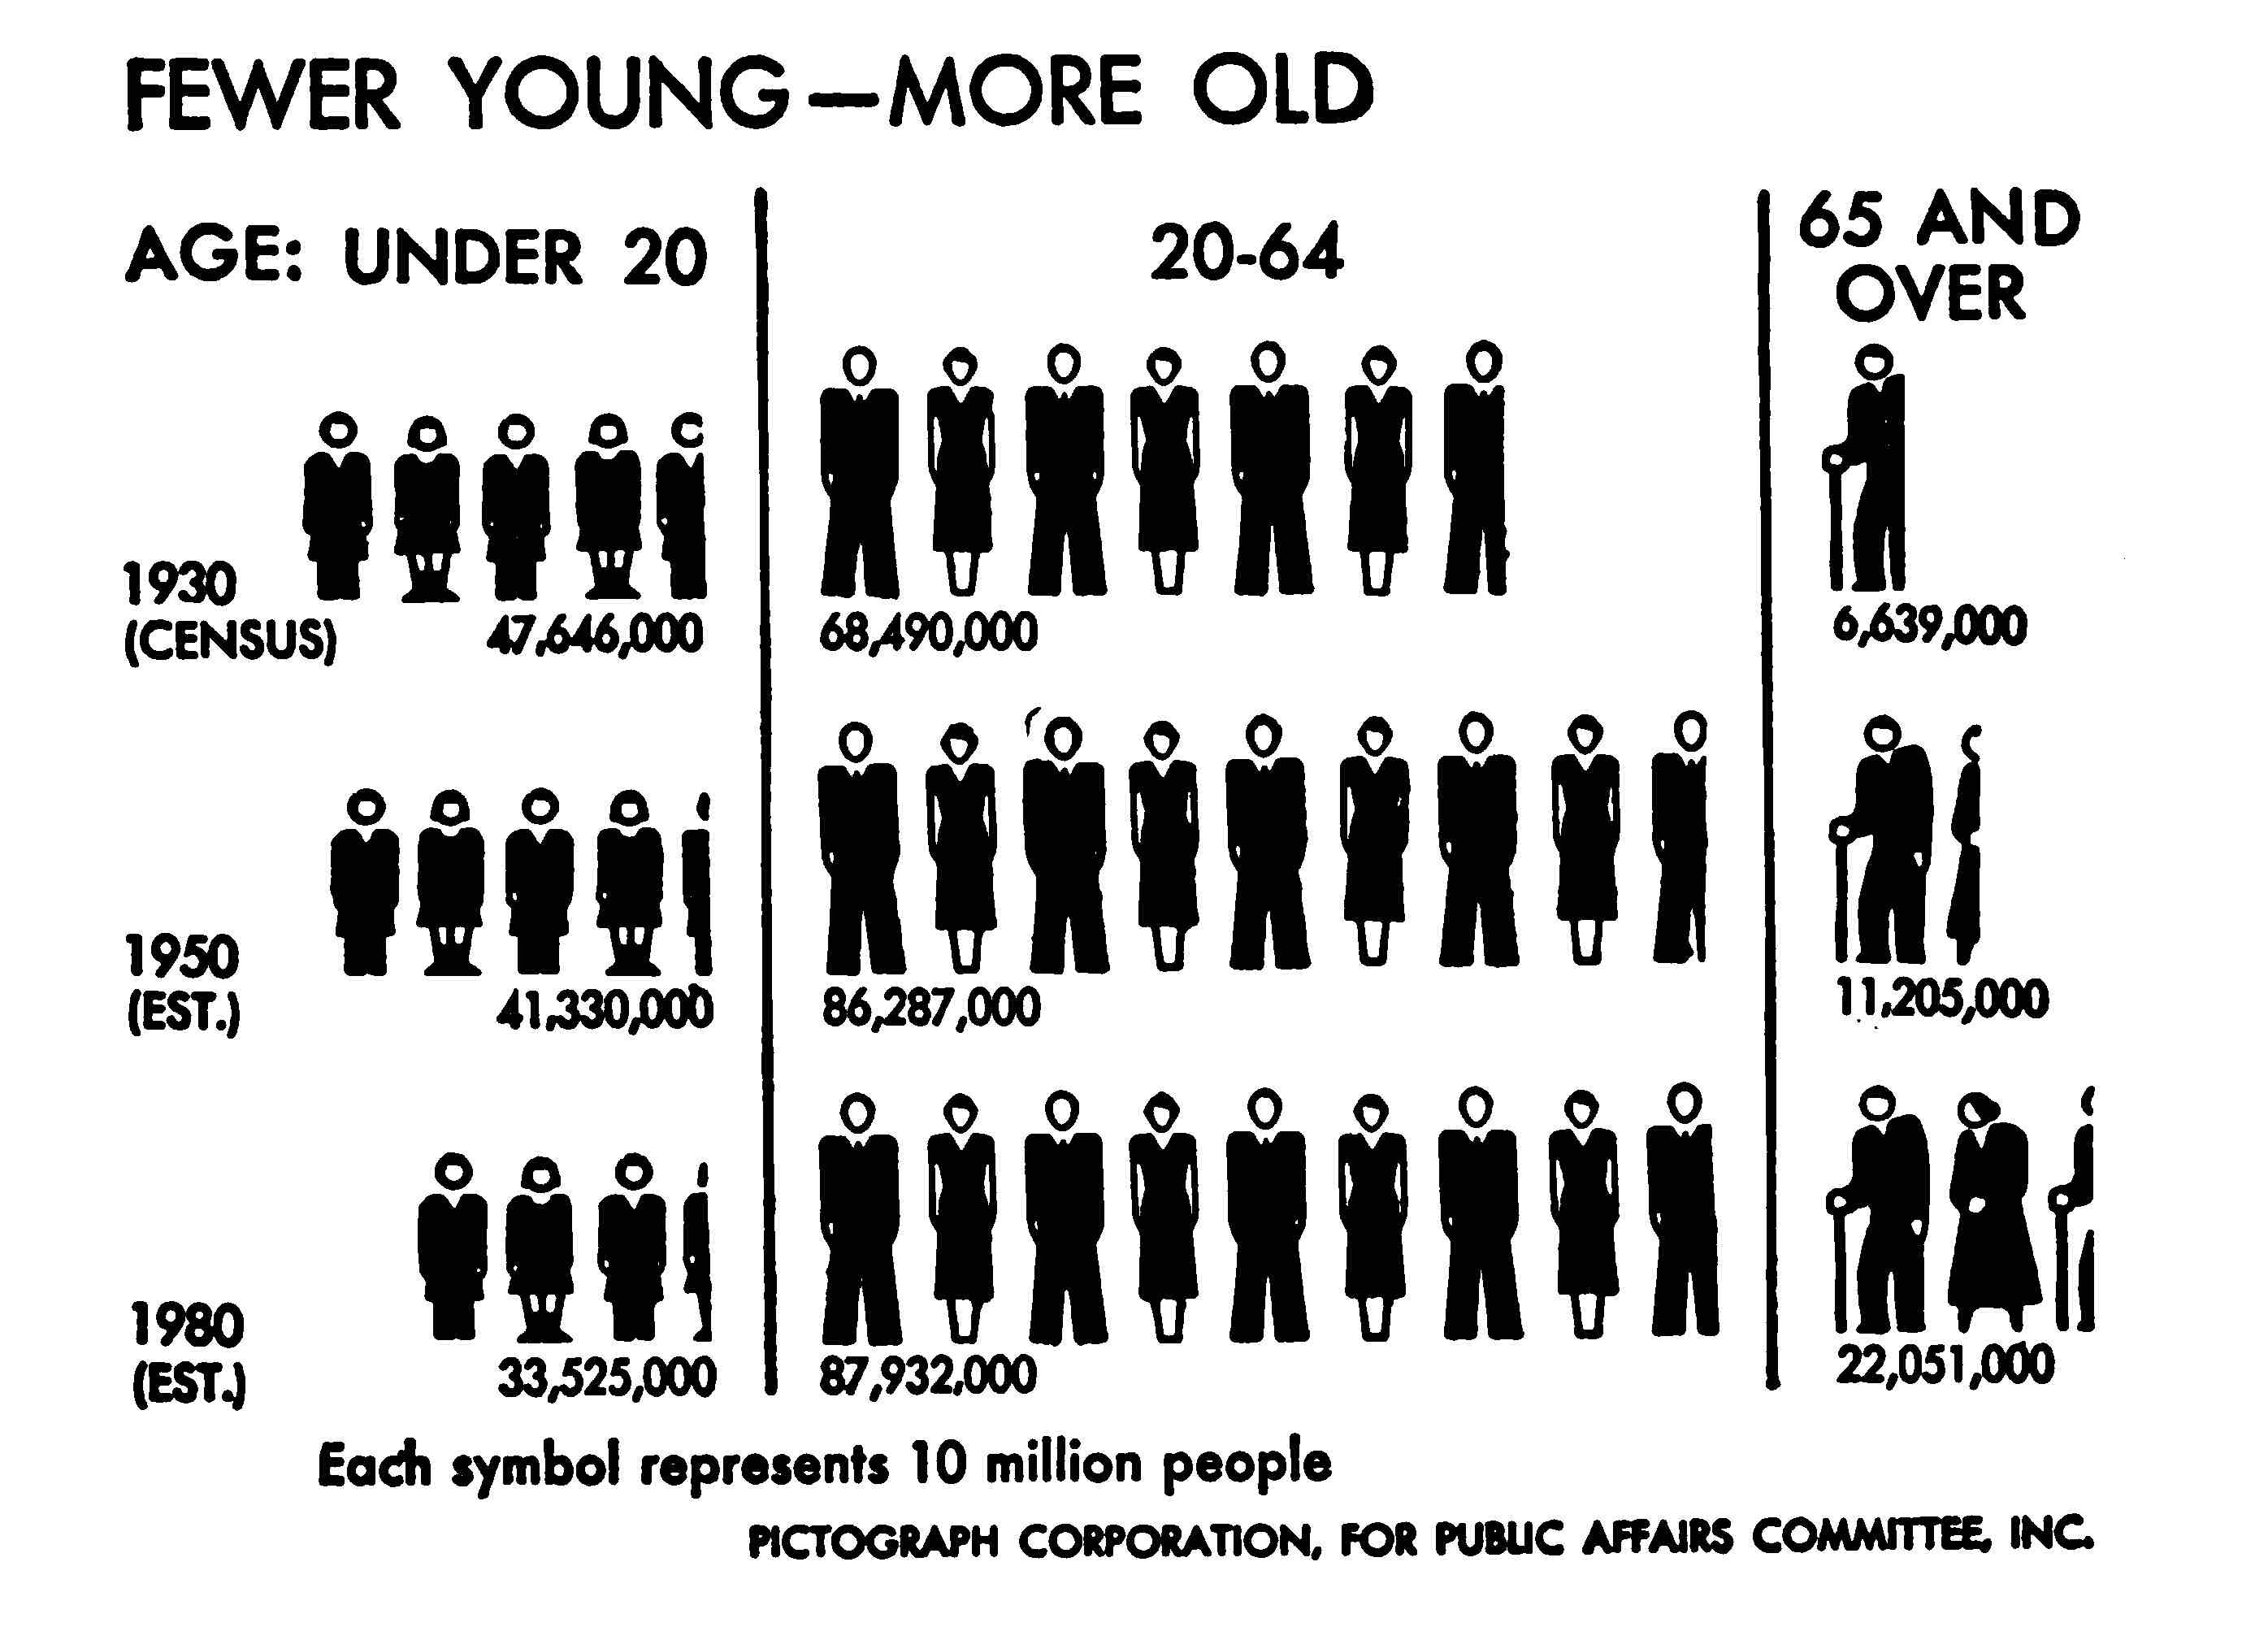 A pictograph demonstrating a growing proportion of the population 65 and over from 1930 and projected to 1980